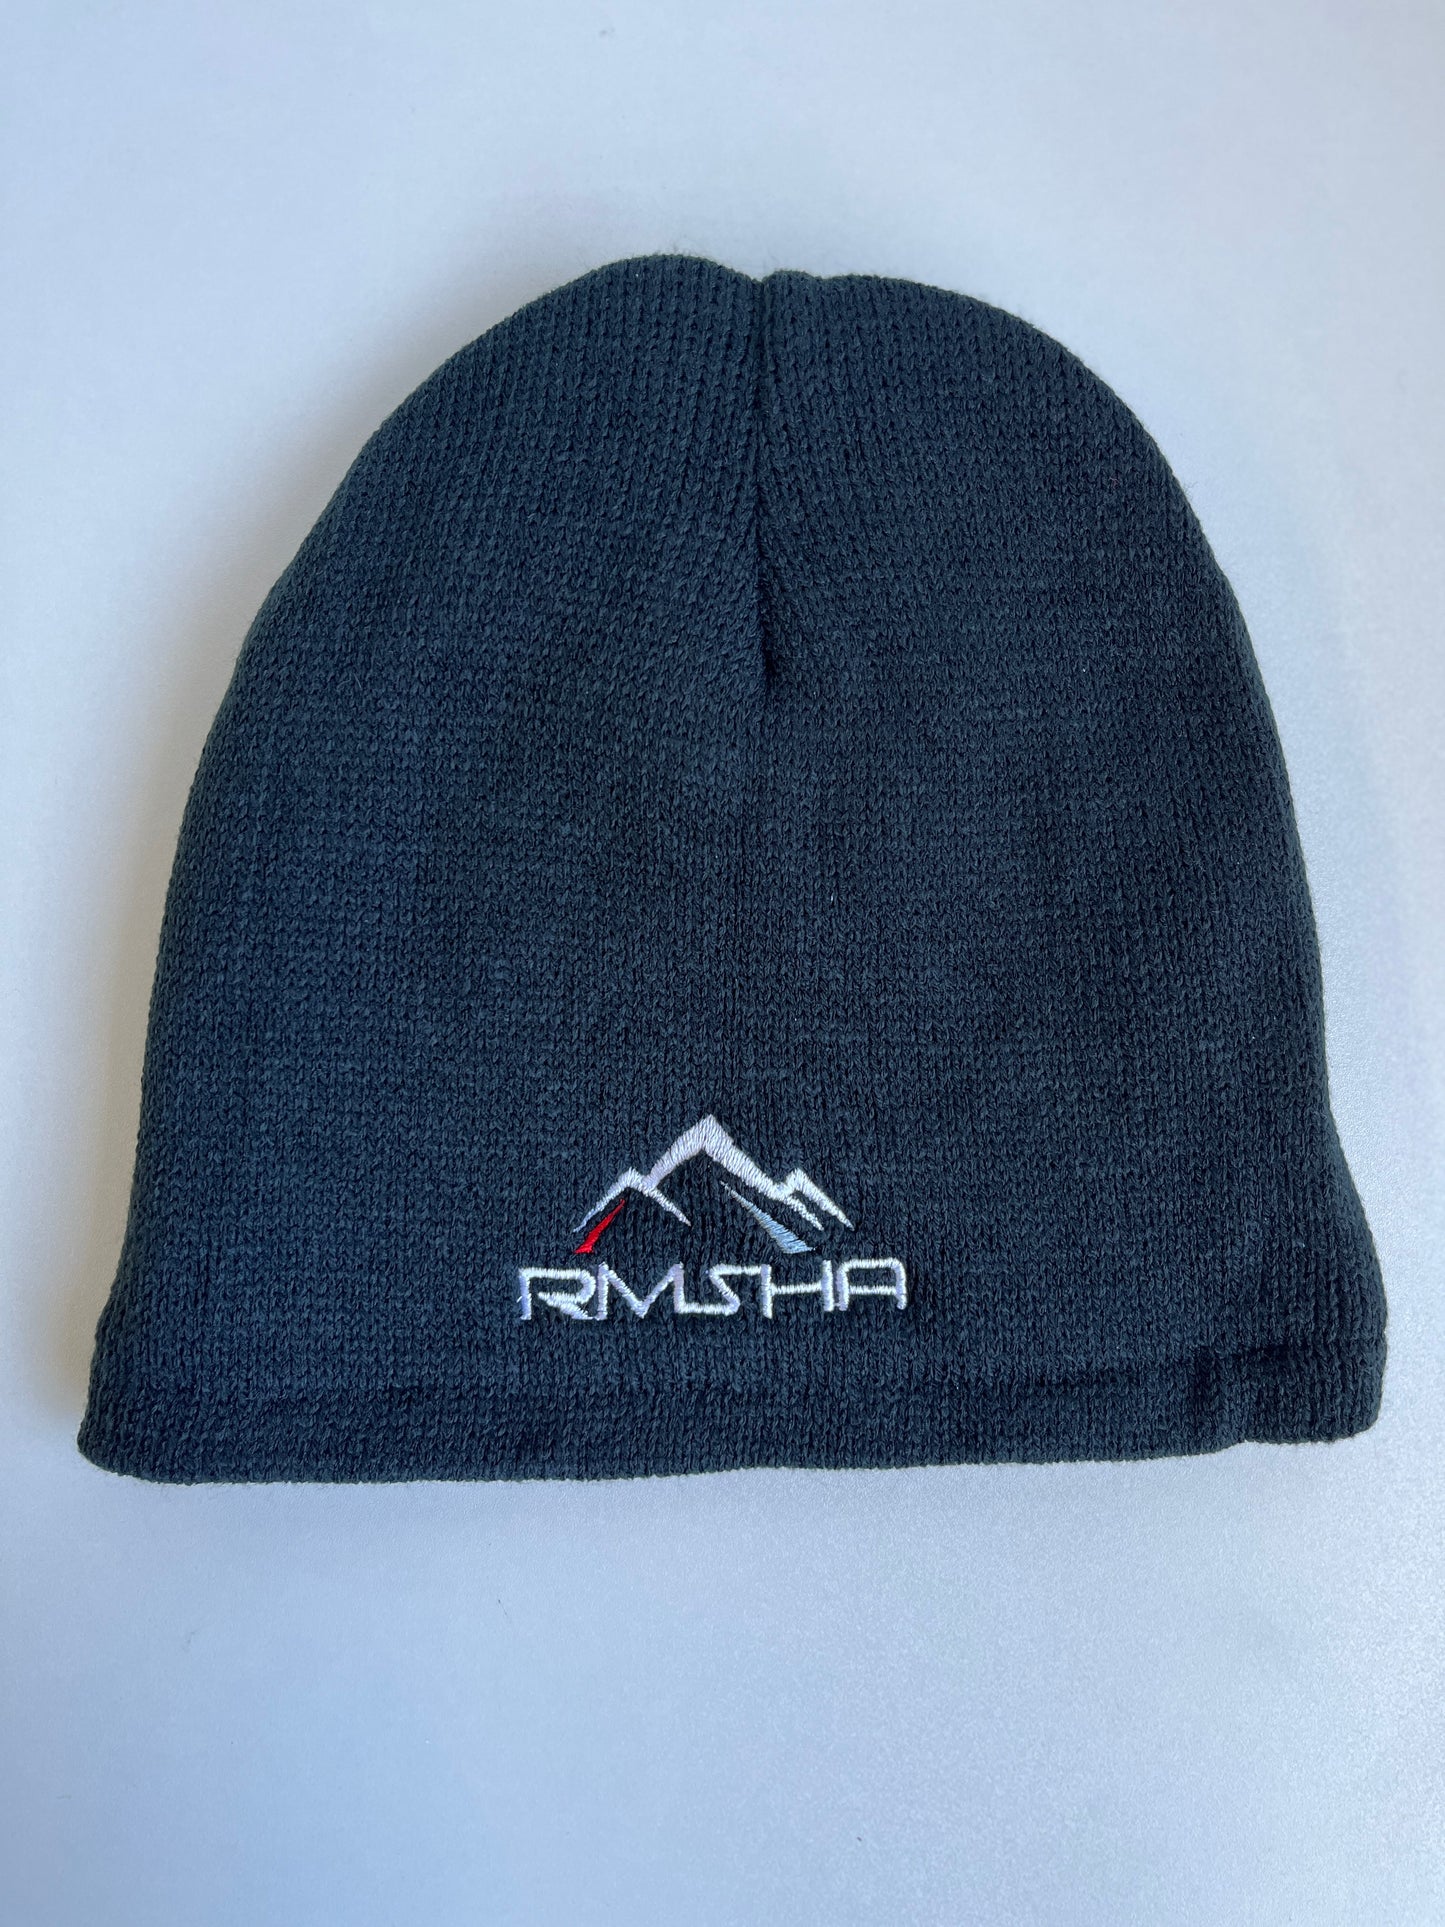 Embroidered RMSHA 12” Sherpa Lined Knit Cuffed Beanie